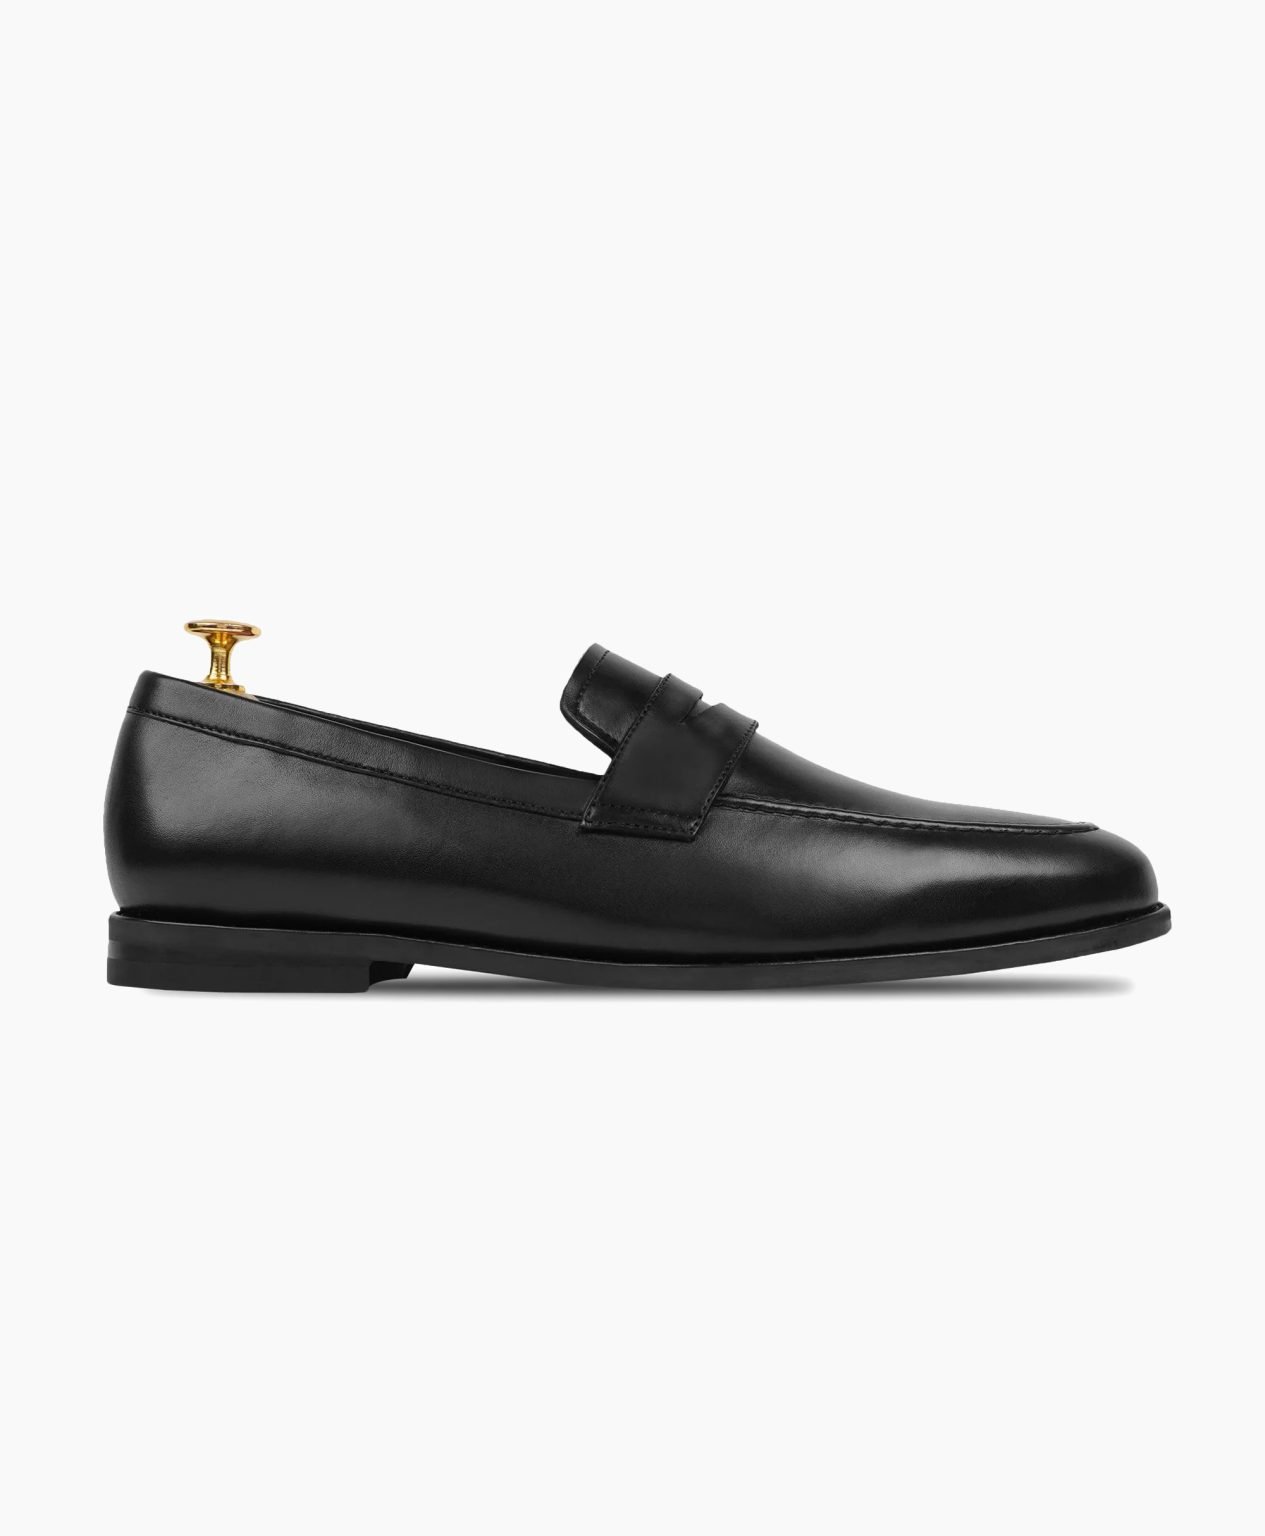 crediton-black-leather-loafers-image201